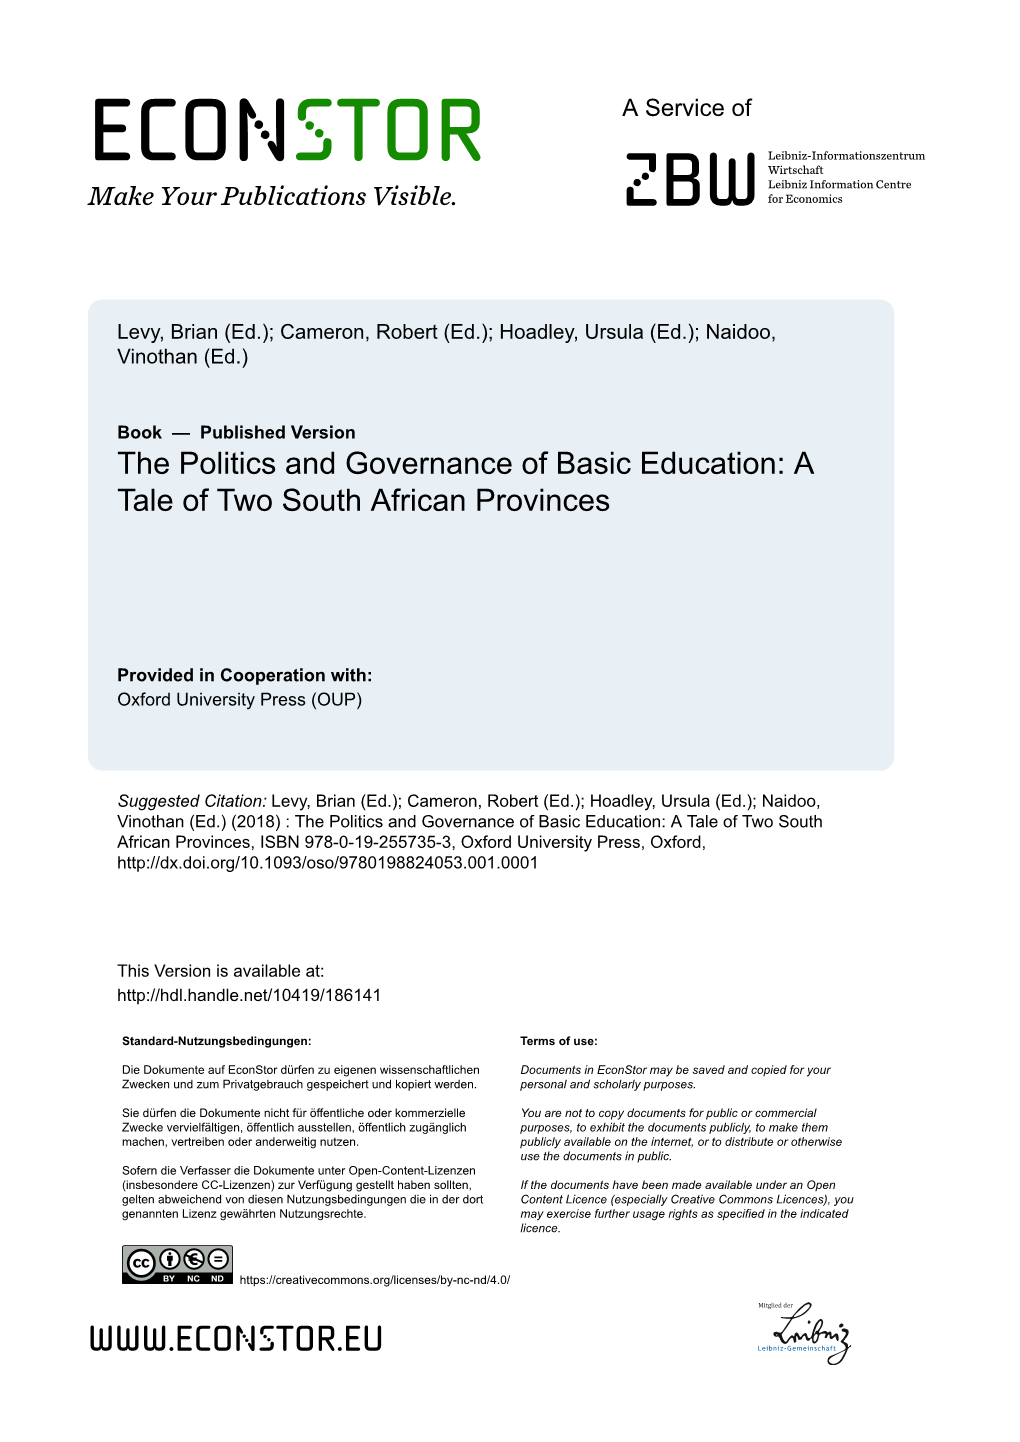 The Politics and Governance of Basic Education: a Tale of Two South African Provinces